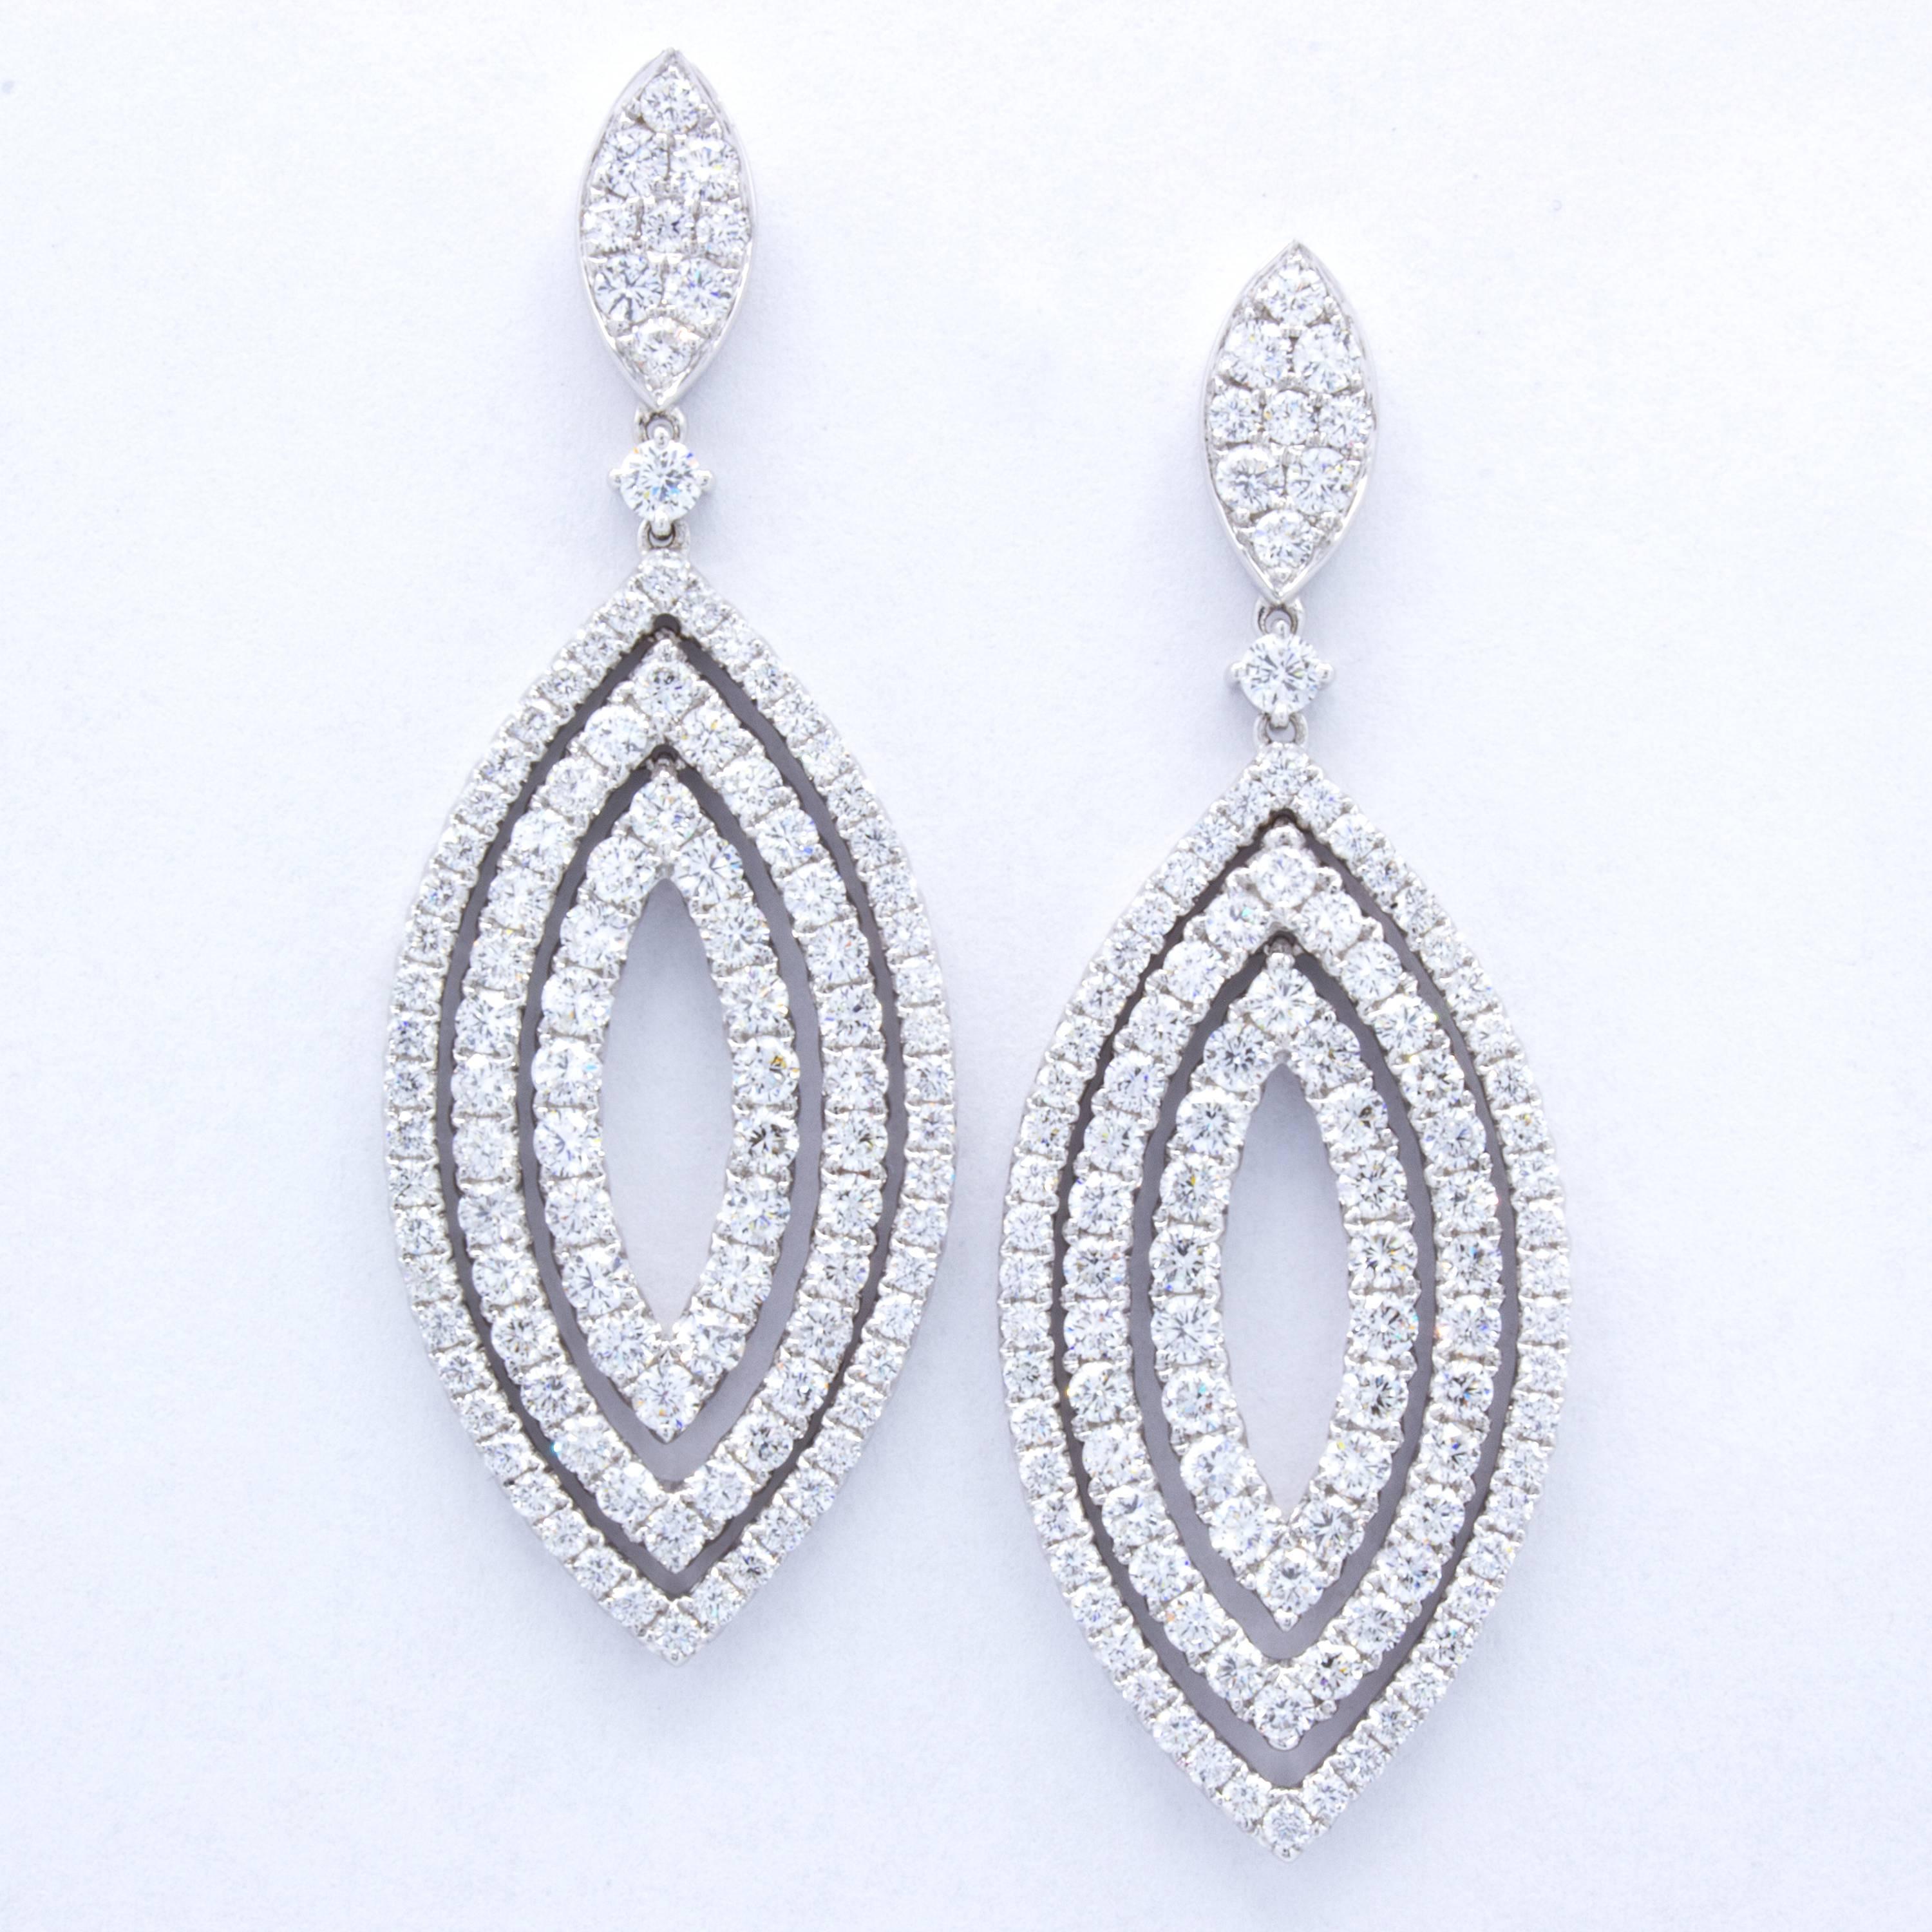 A contemporary classic in the form of 18Kt white gold and brilliant round diamonds. These Rosenberg Diamonds & Co. diamond dangle earrings show three concentric marquise motifs, accented with glittering pave set stones. Designed by David Rosenberg.